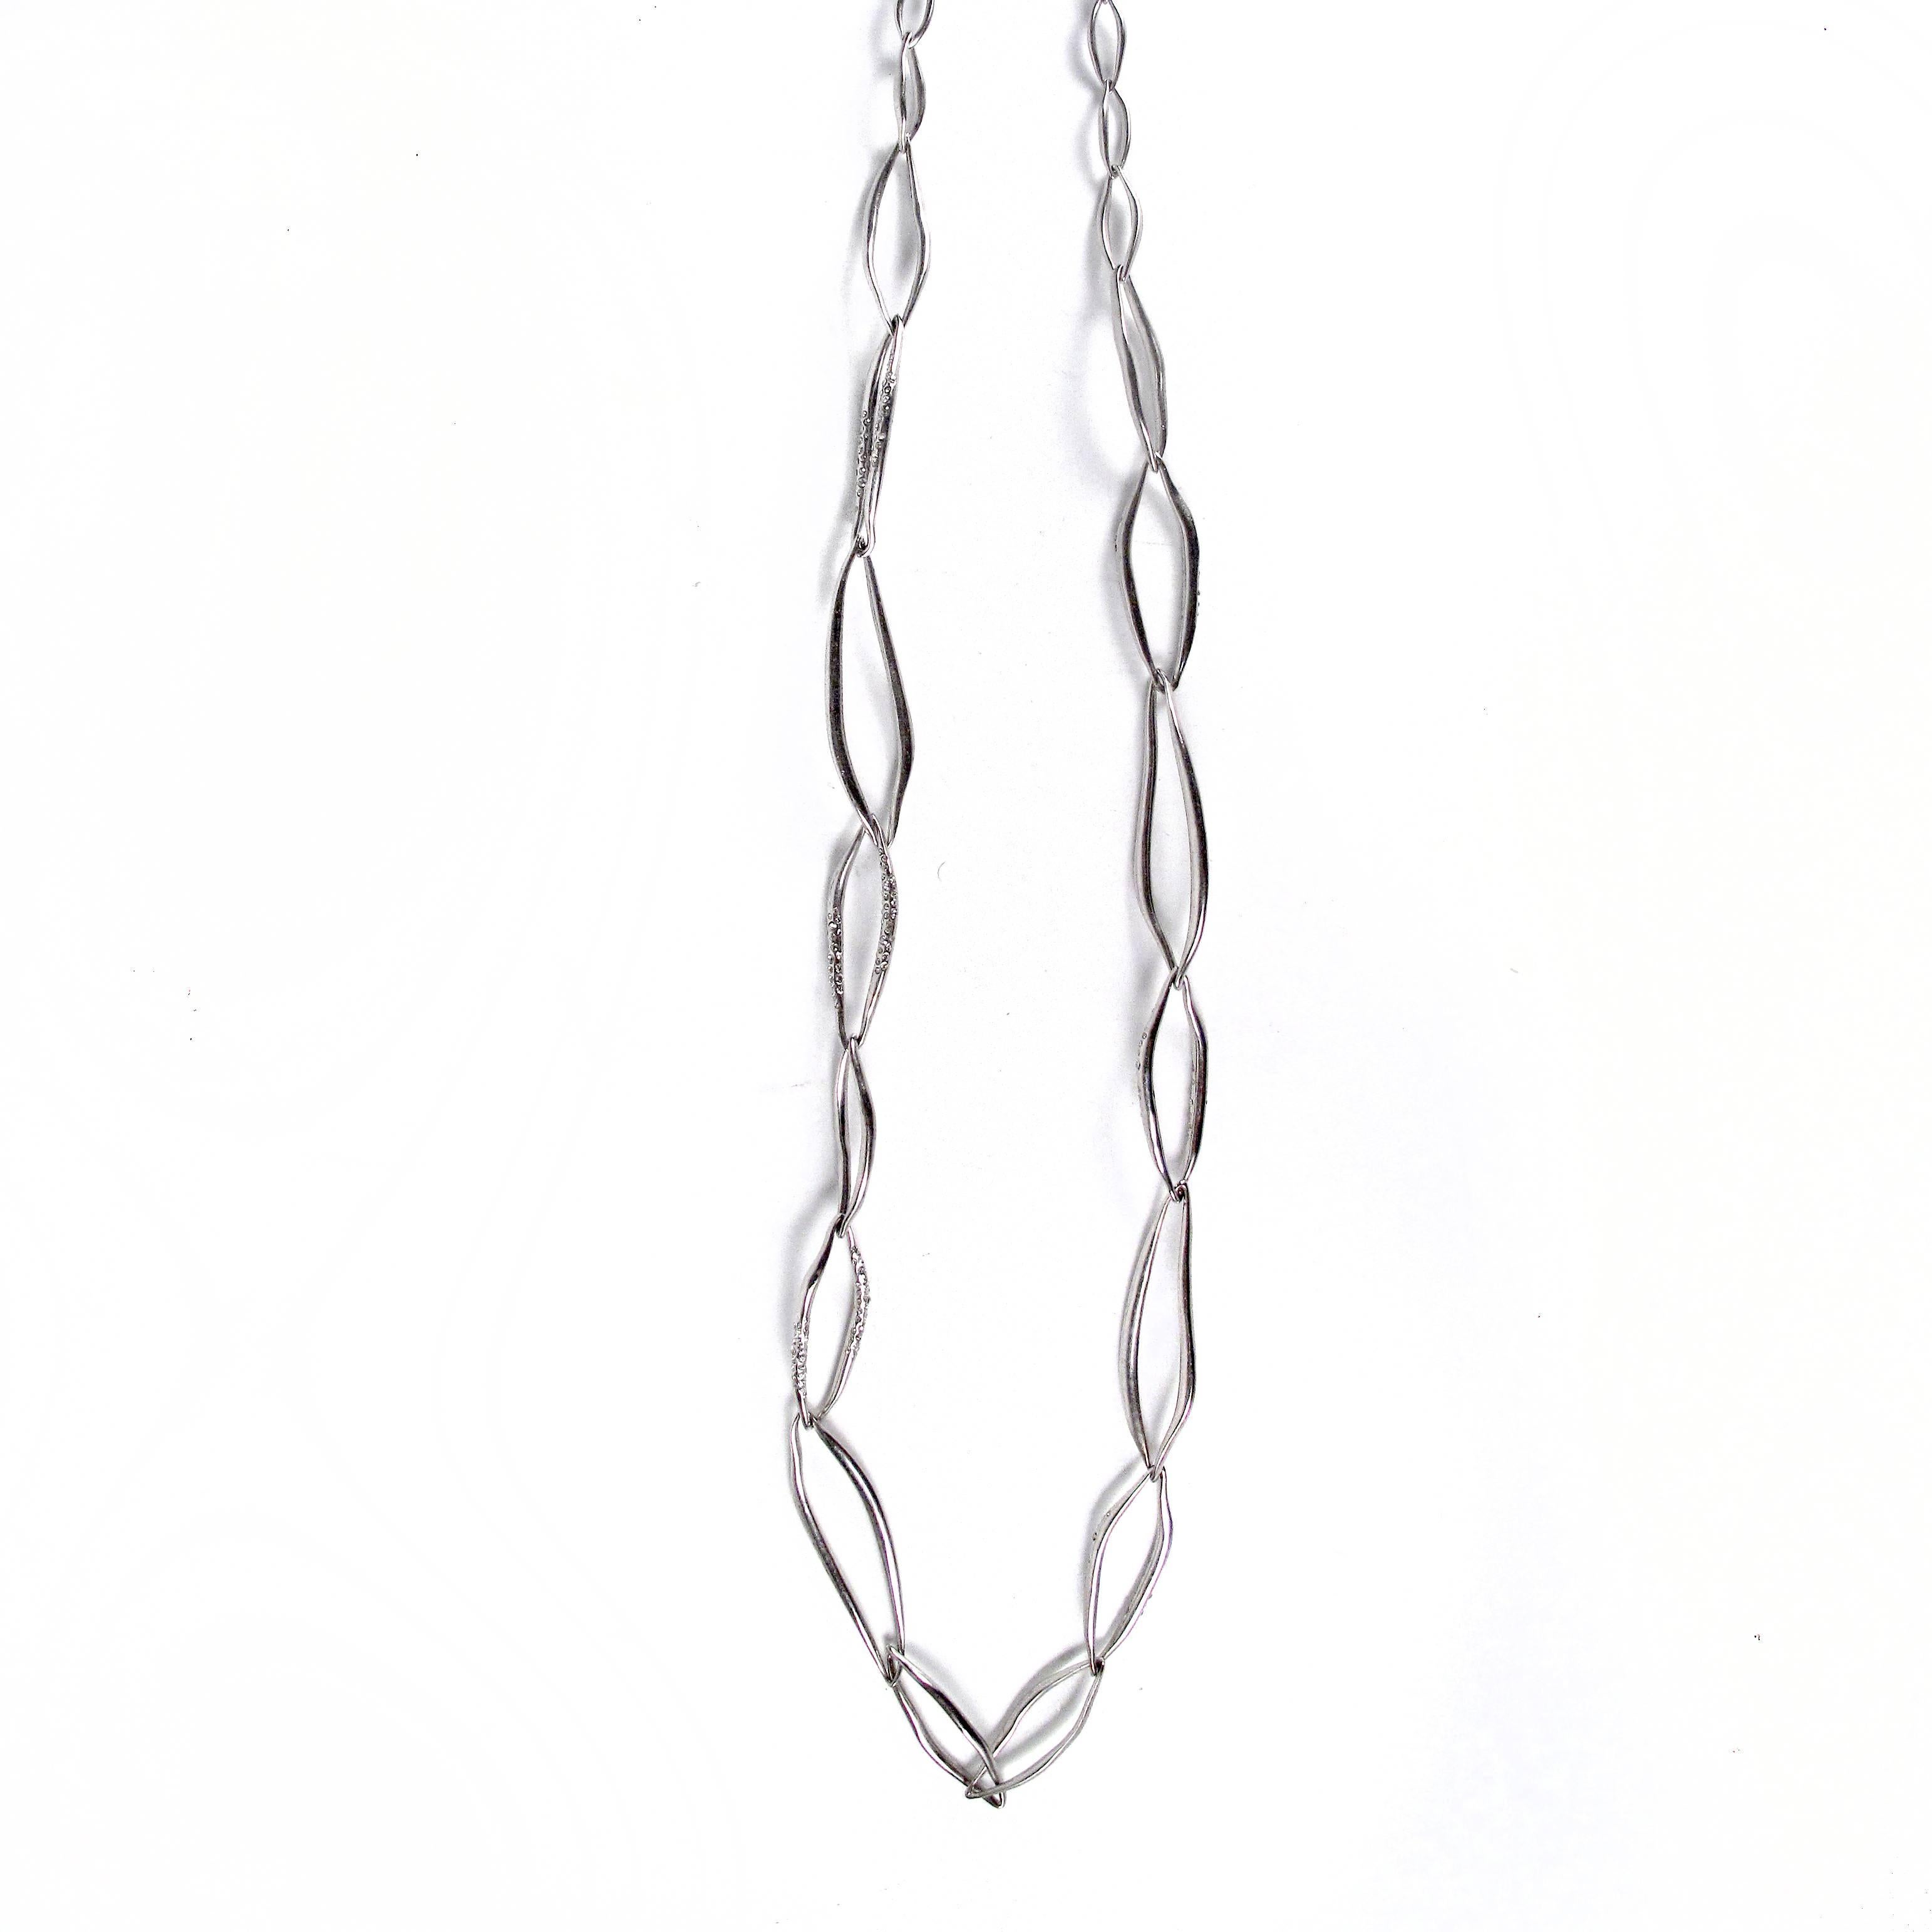 Alexis Bittar - Chain Necklace

Color: Silver

Material: Metal

------------------------------------------------------------

Details:

- crystal embellishments at chain

- lobster clasp closure

- includes dust bag

- item #